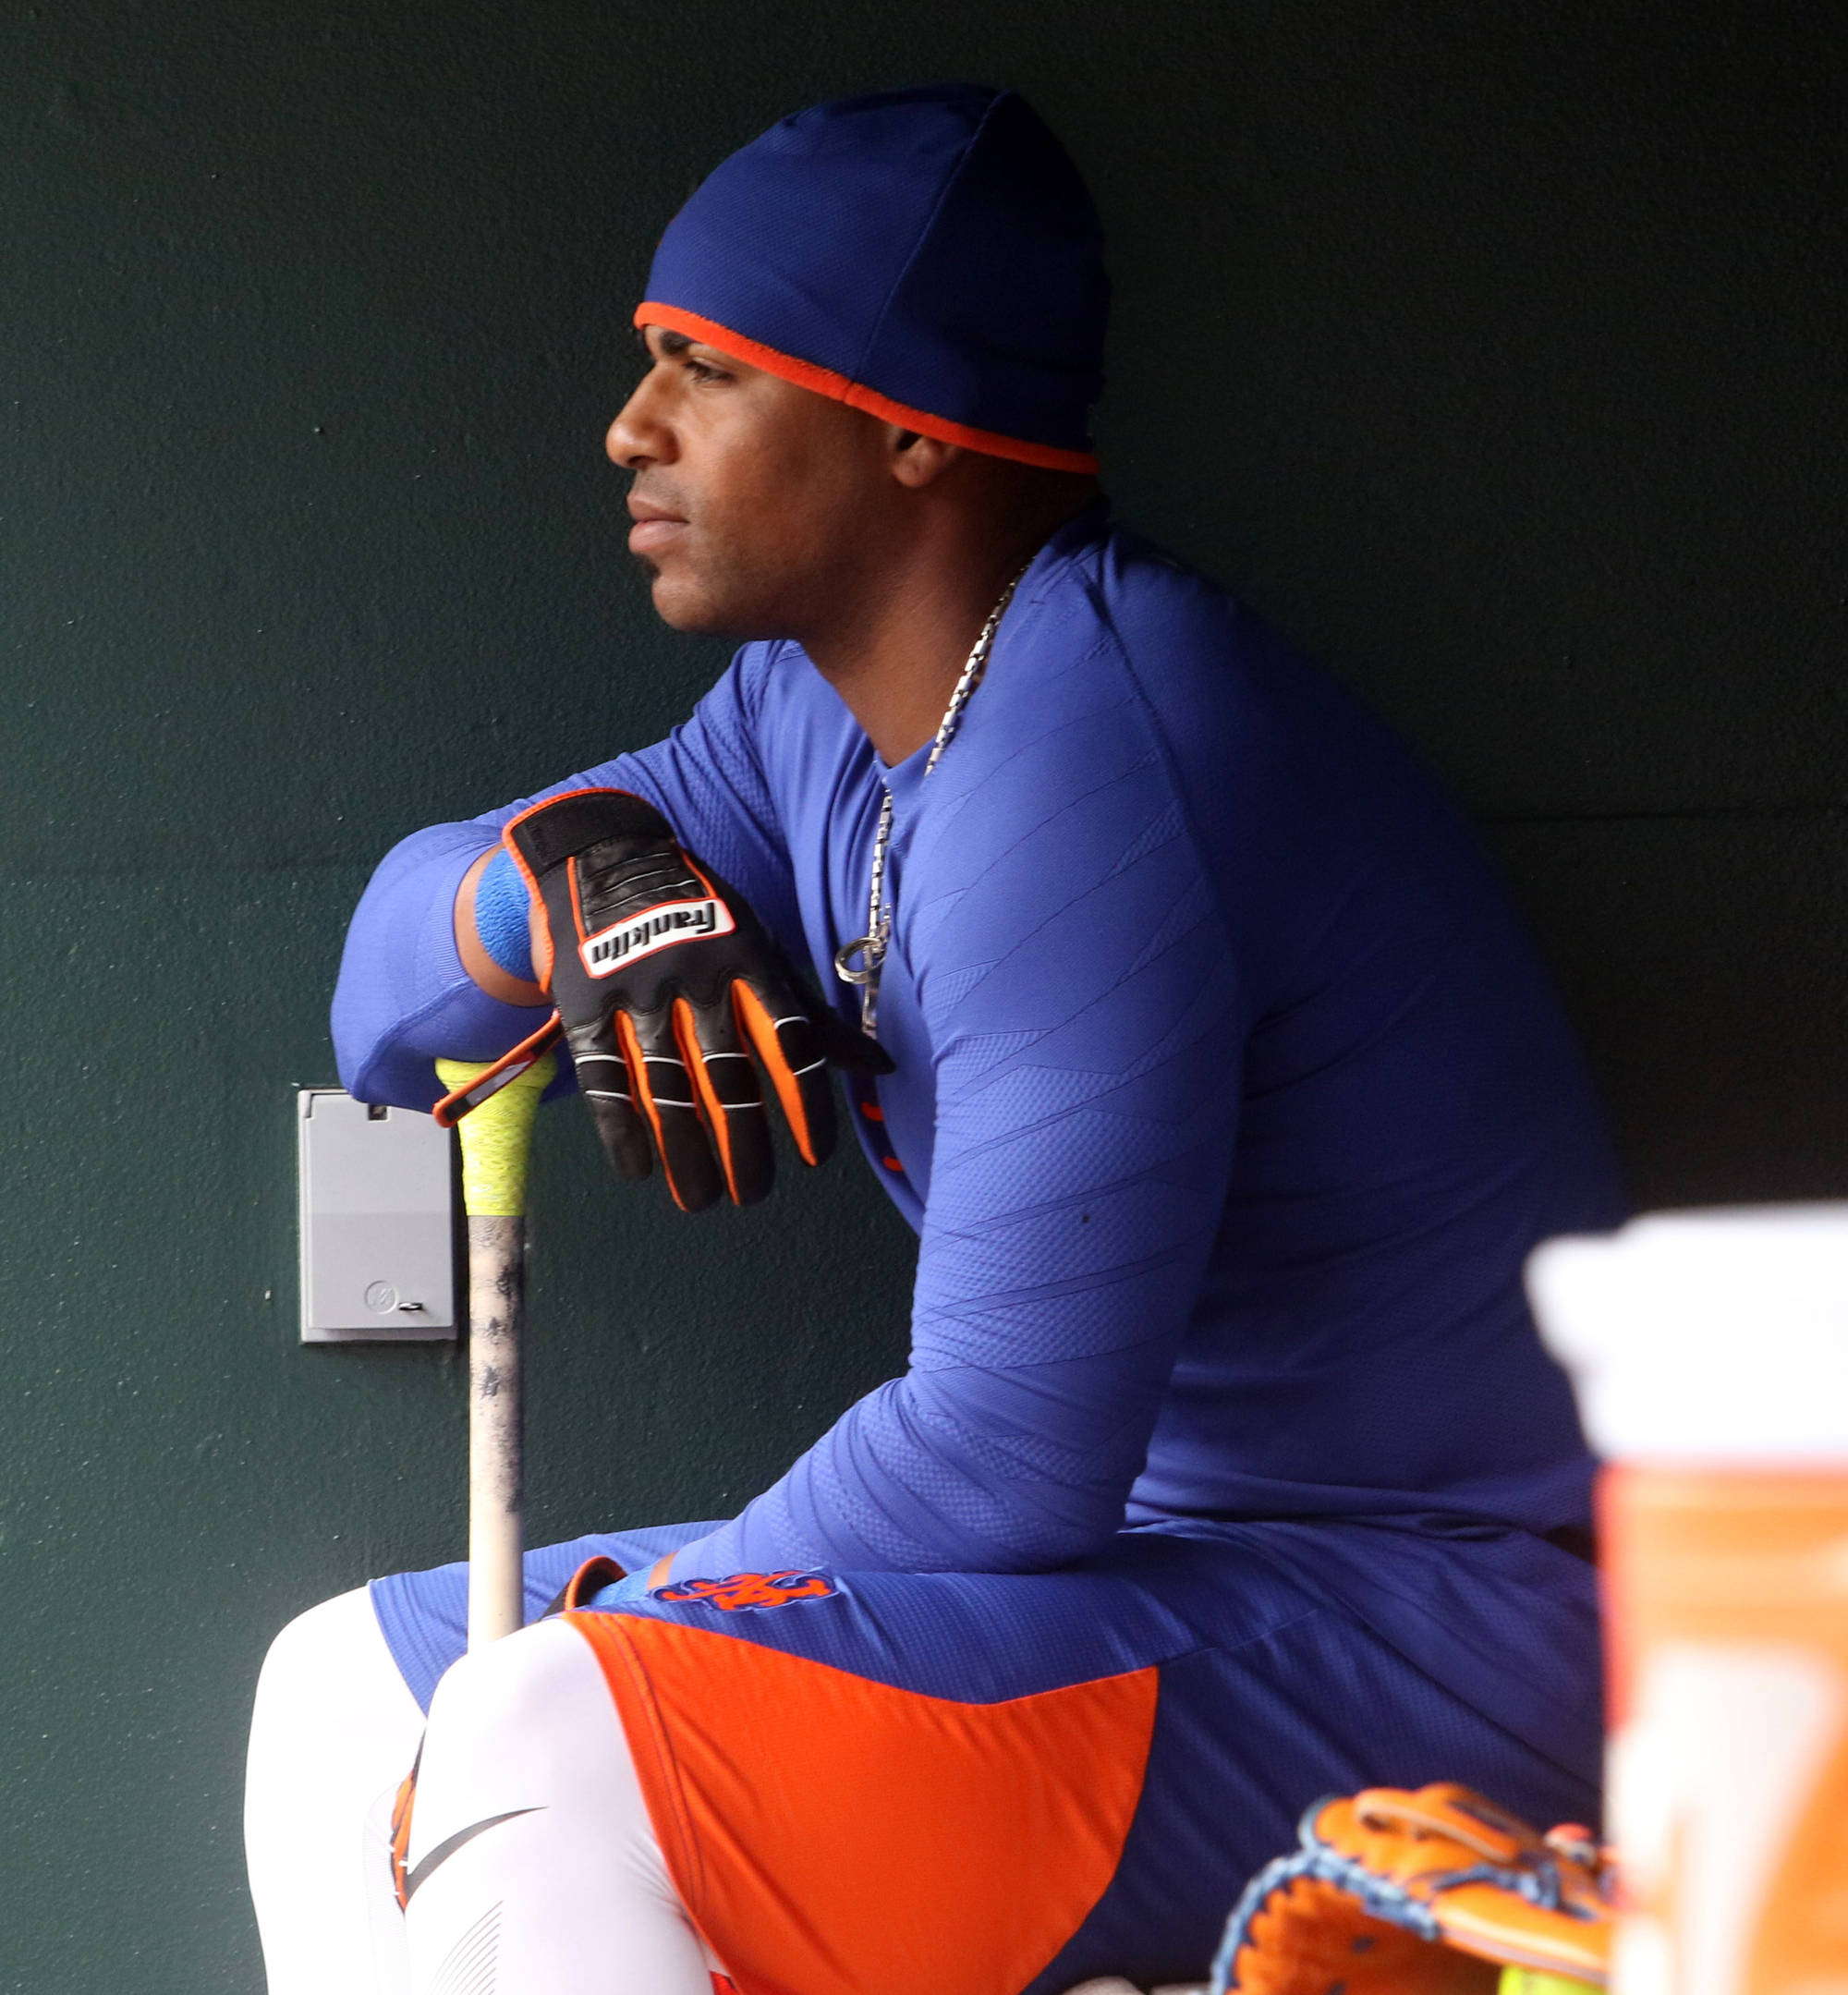 Will Yoenis Cespedes opt out?